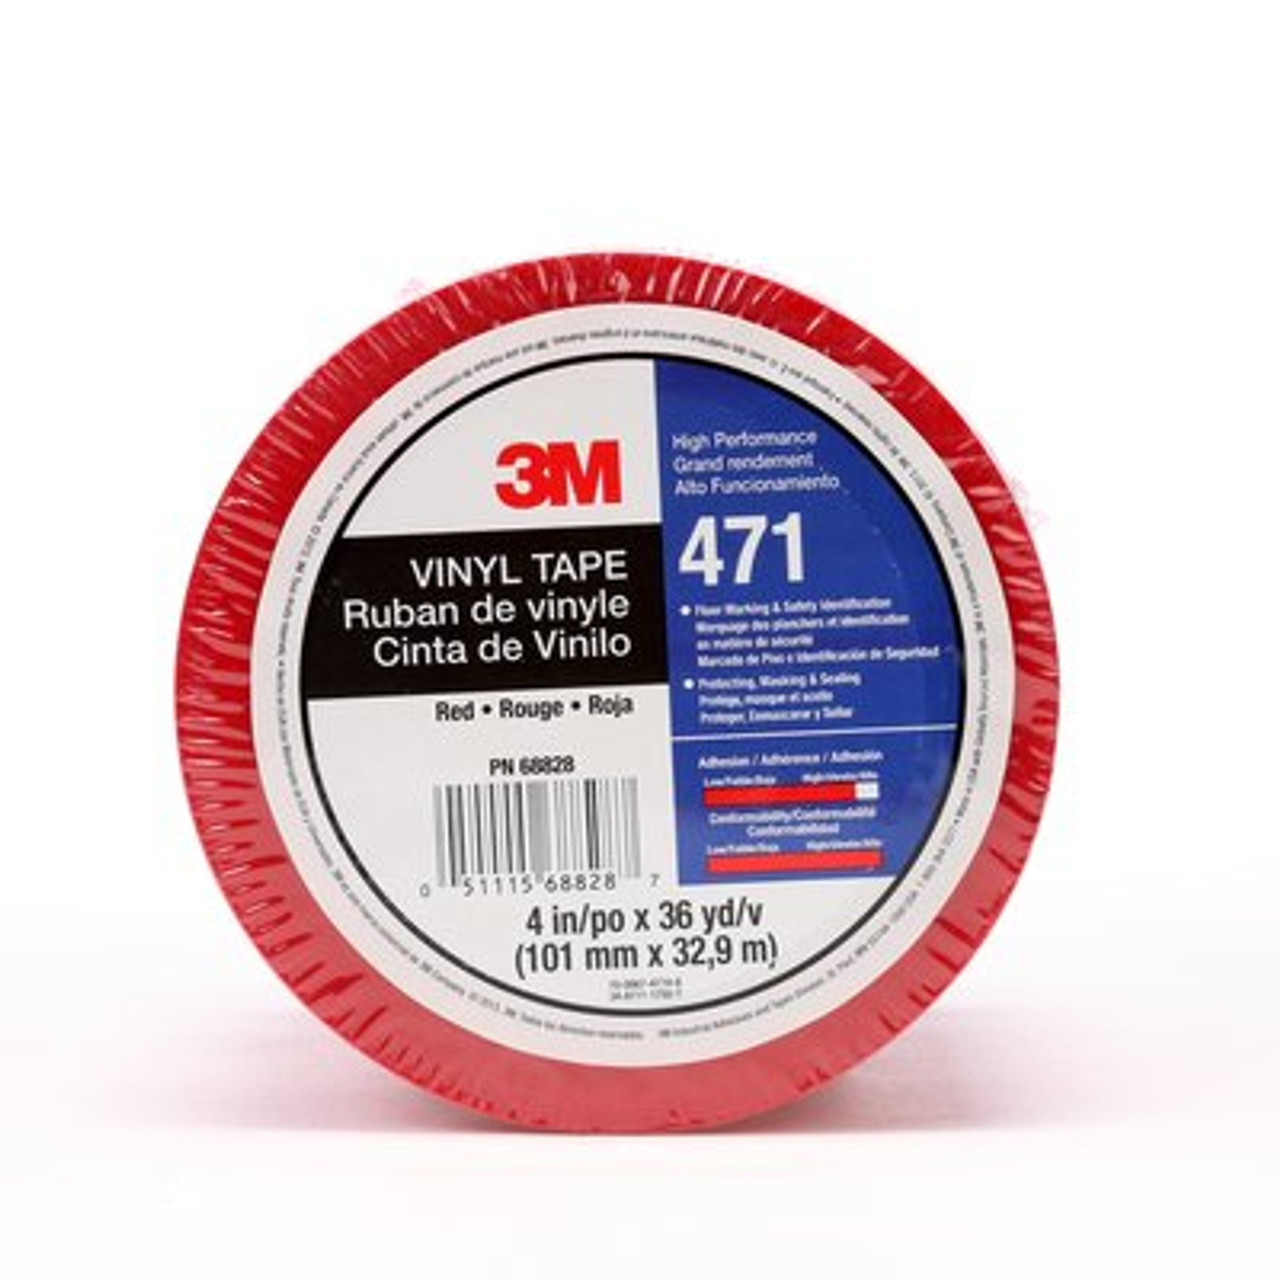 3M™ Vinyl Tape 471, Red, 4 in x 36 yd, 5.2 mil Individually wrapped